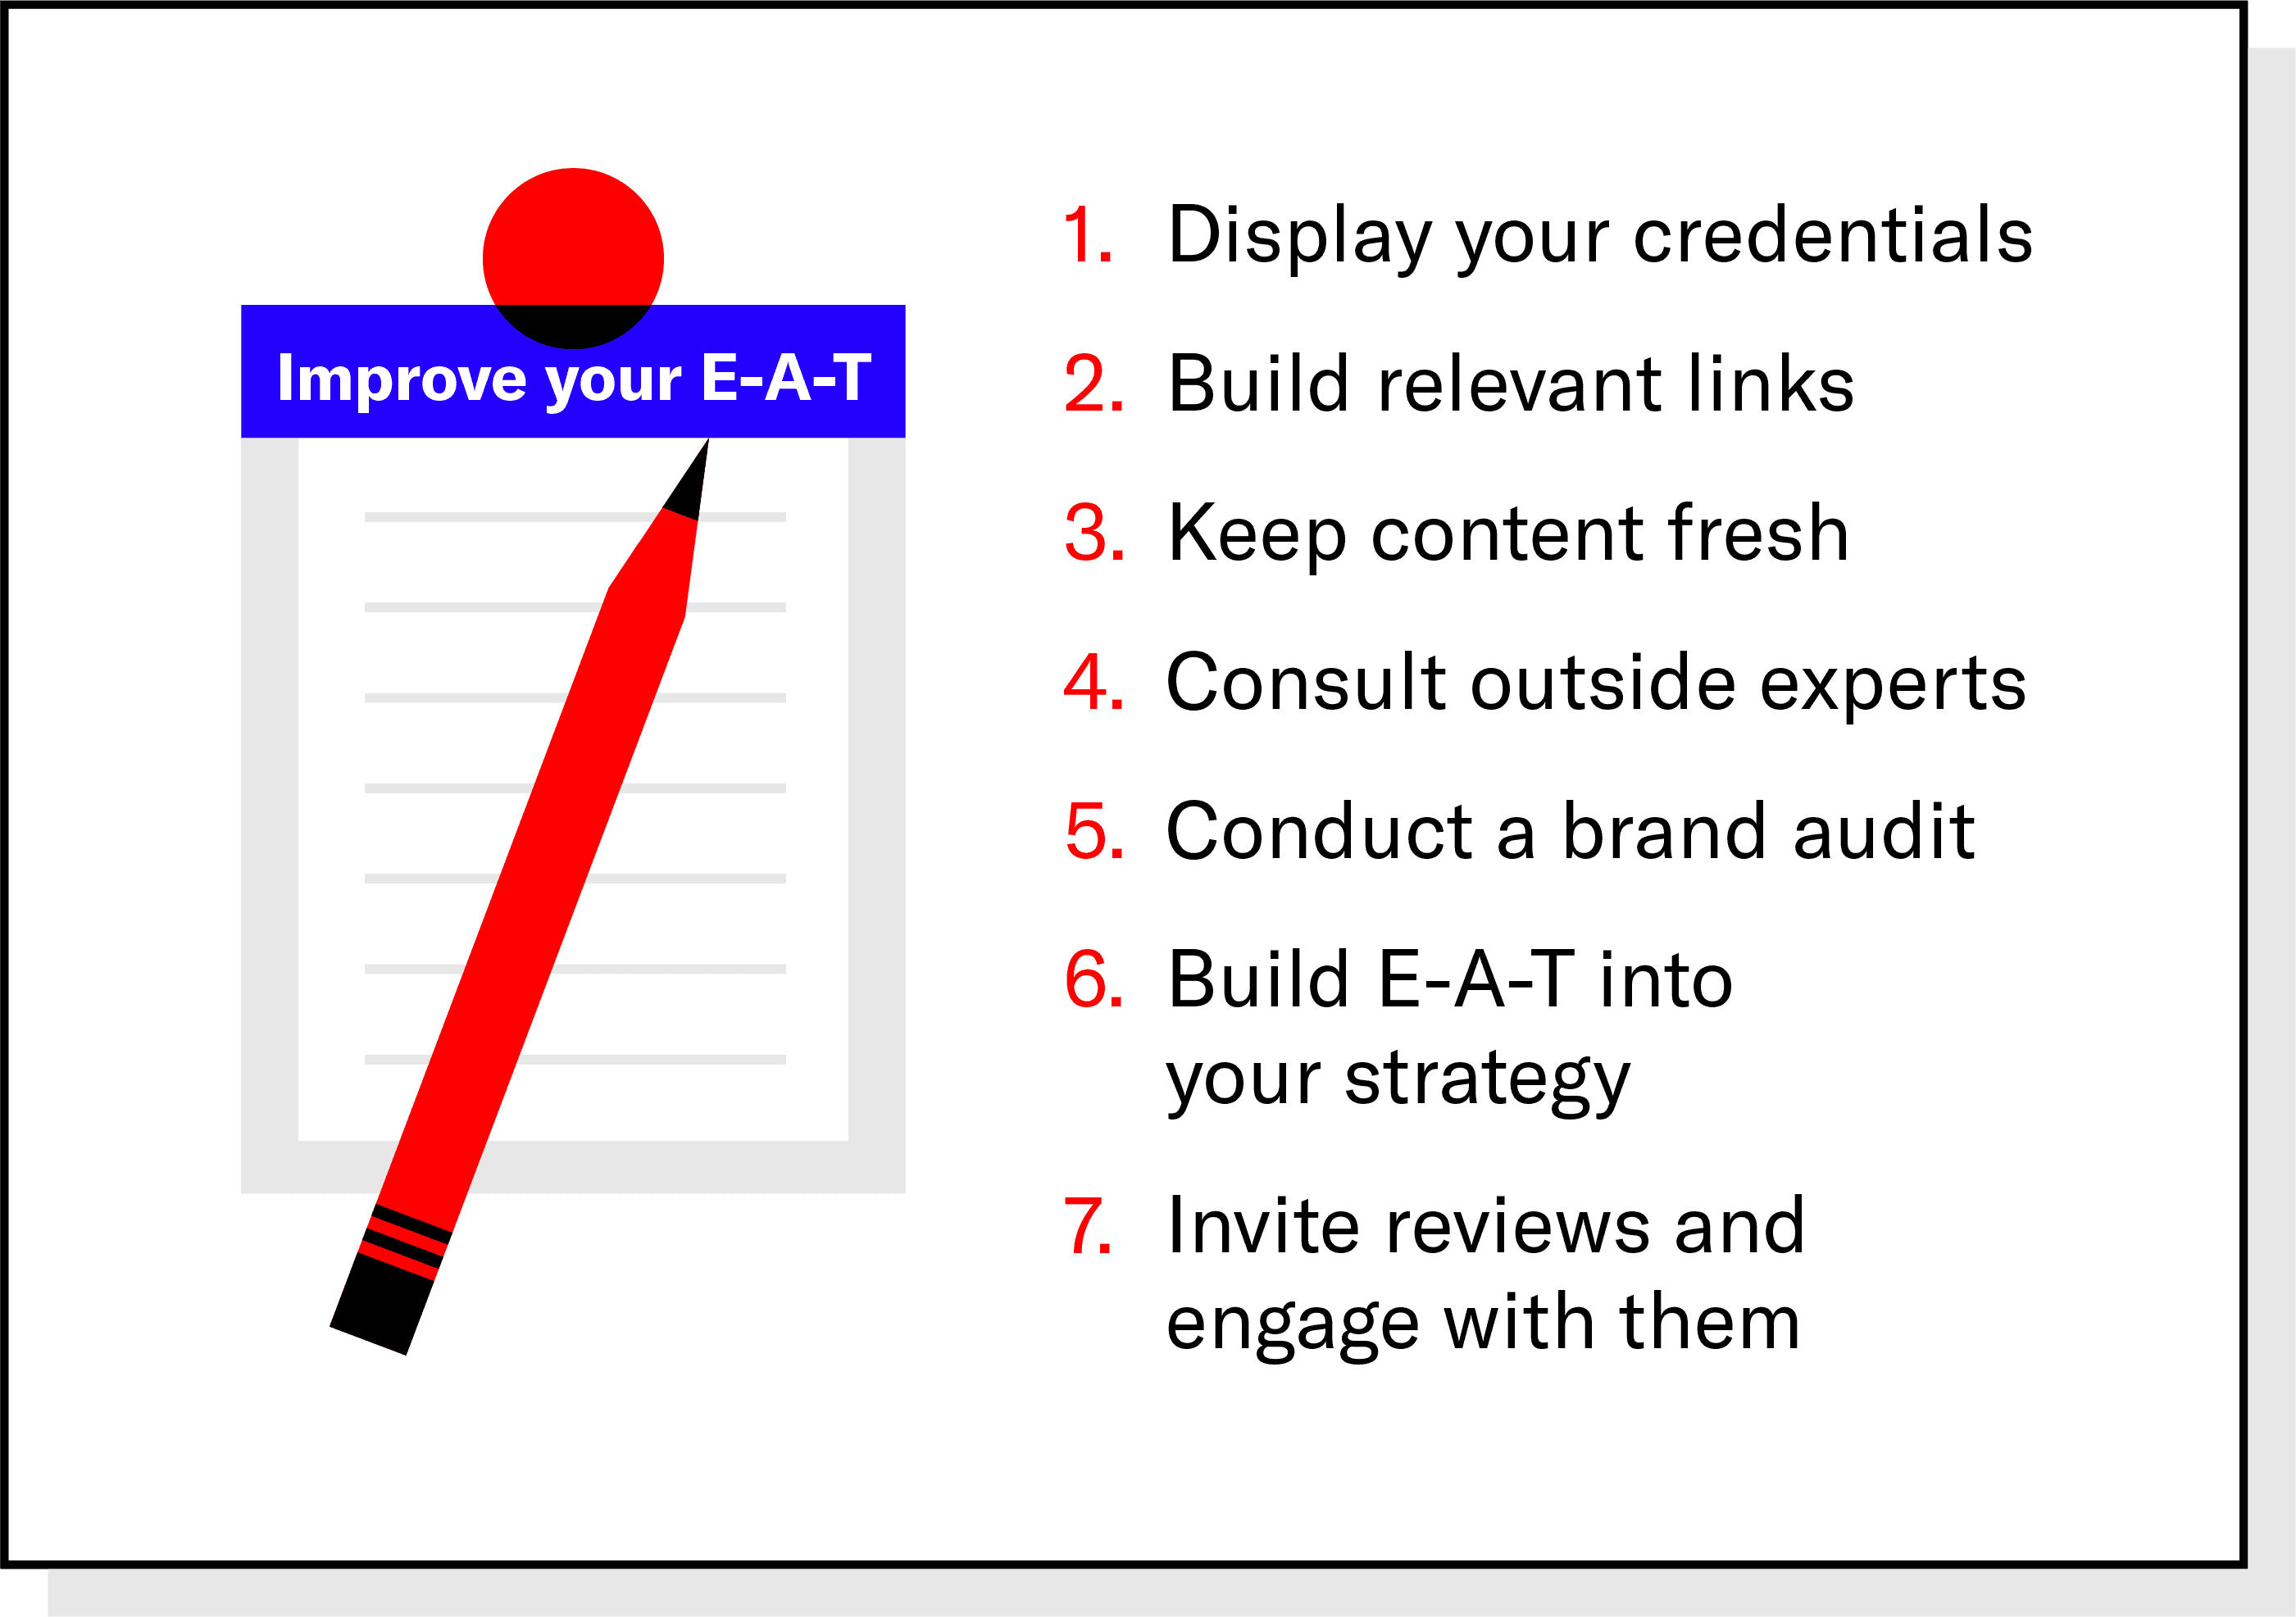 List of seven tips for improving E-A-T next to an illustrated pencil and notepad